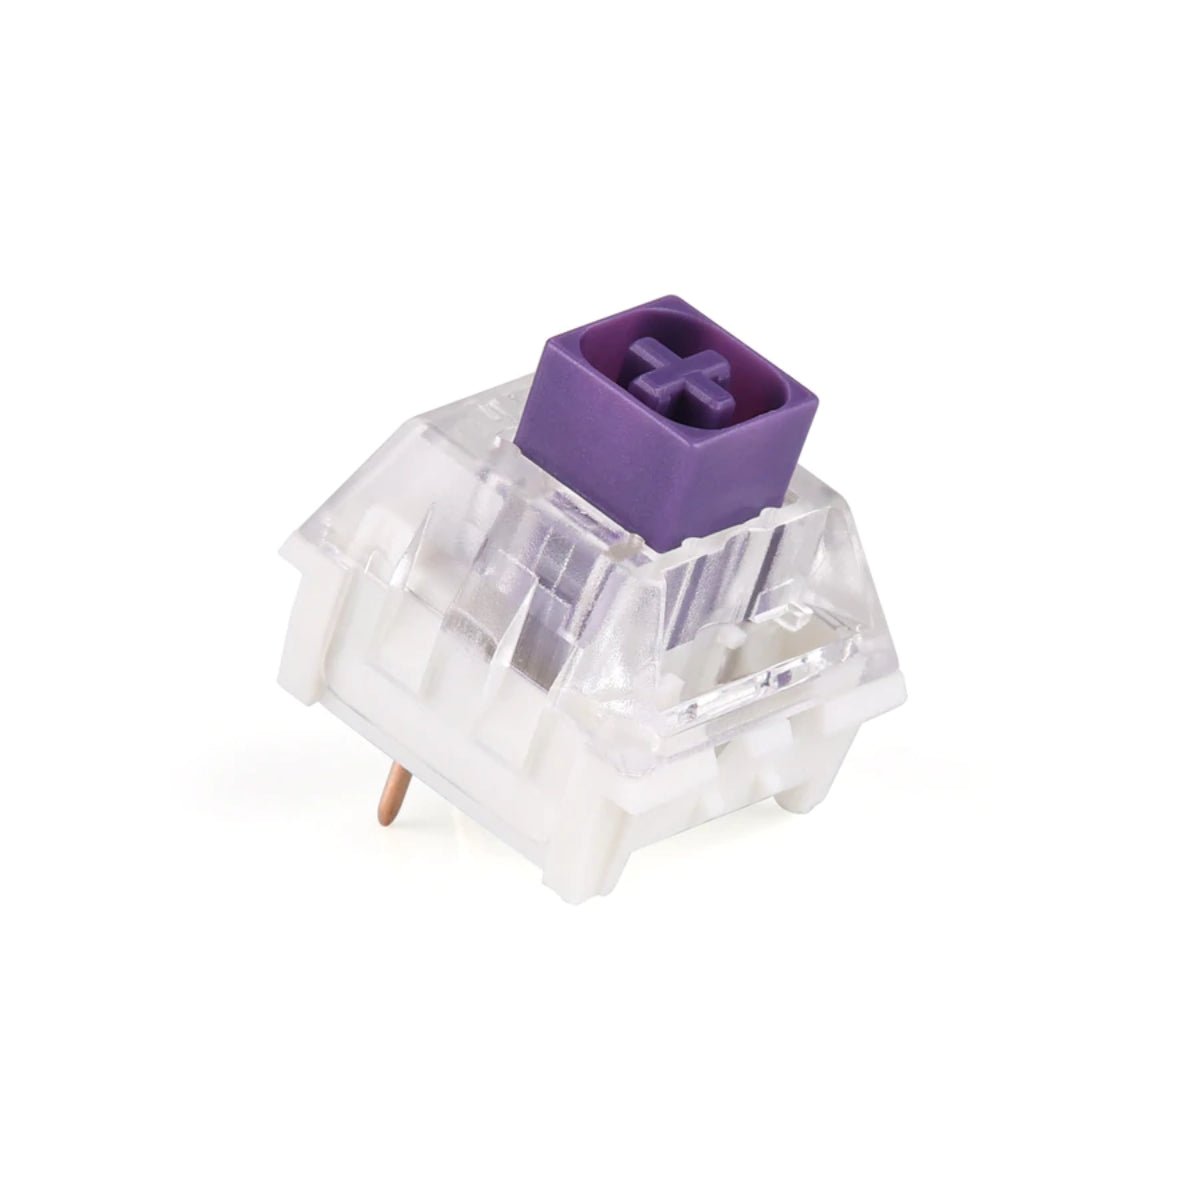 KBD Fans Kailh Box Tactile Switches - Royal - Store 974 | ستور ٩٧٤